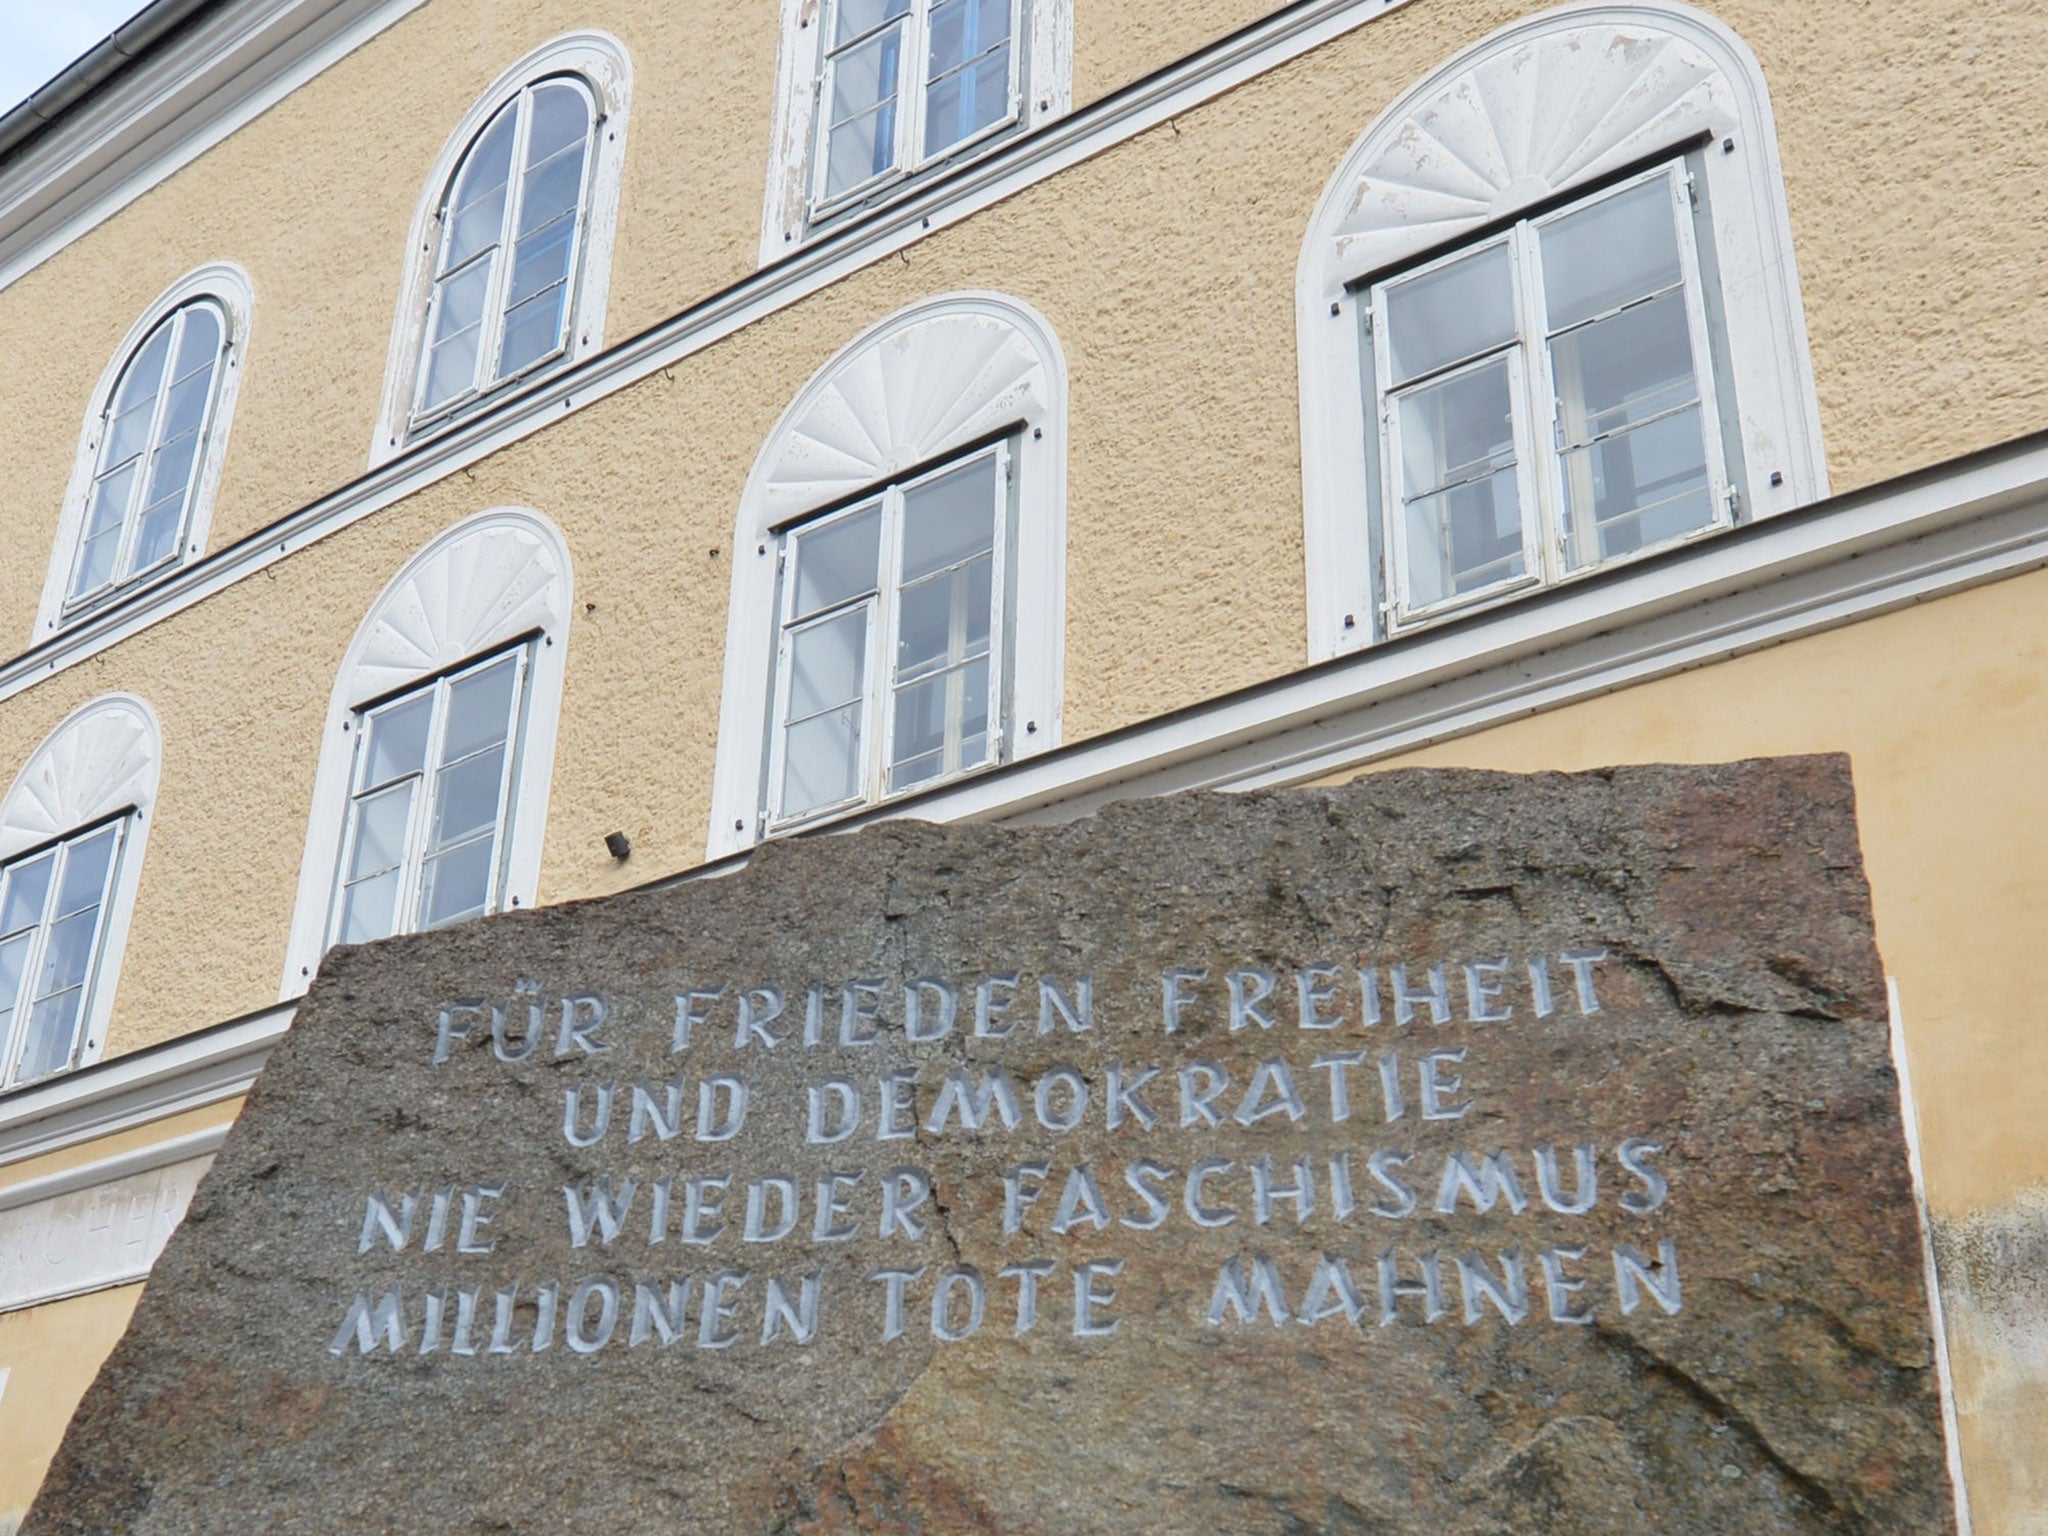 A stone outside Hitler's birthplace in Braunau pays tribute to victims of fascism